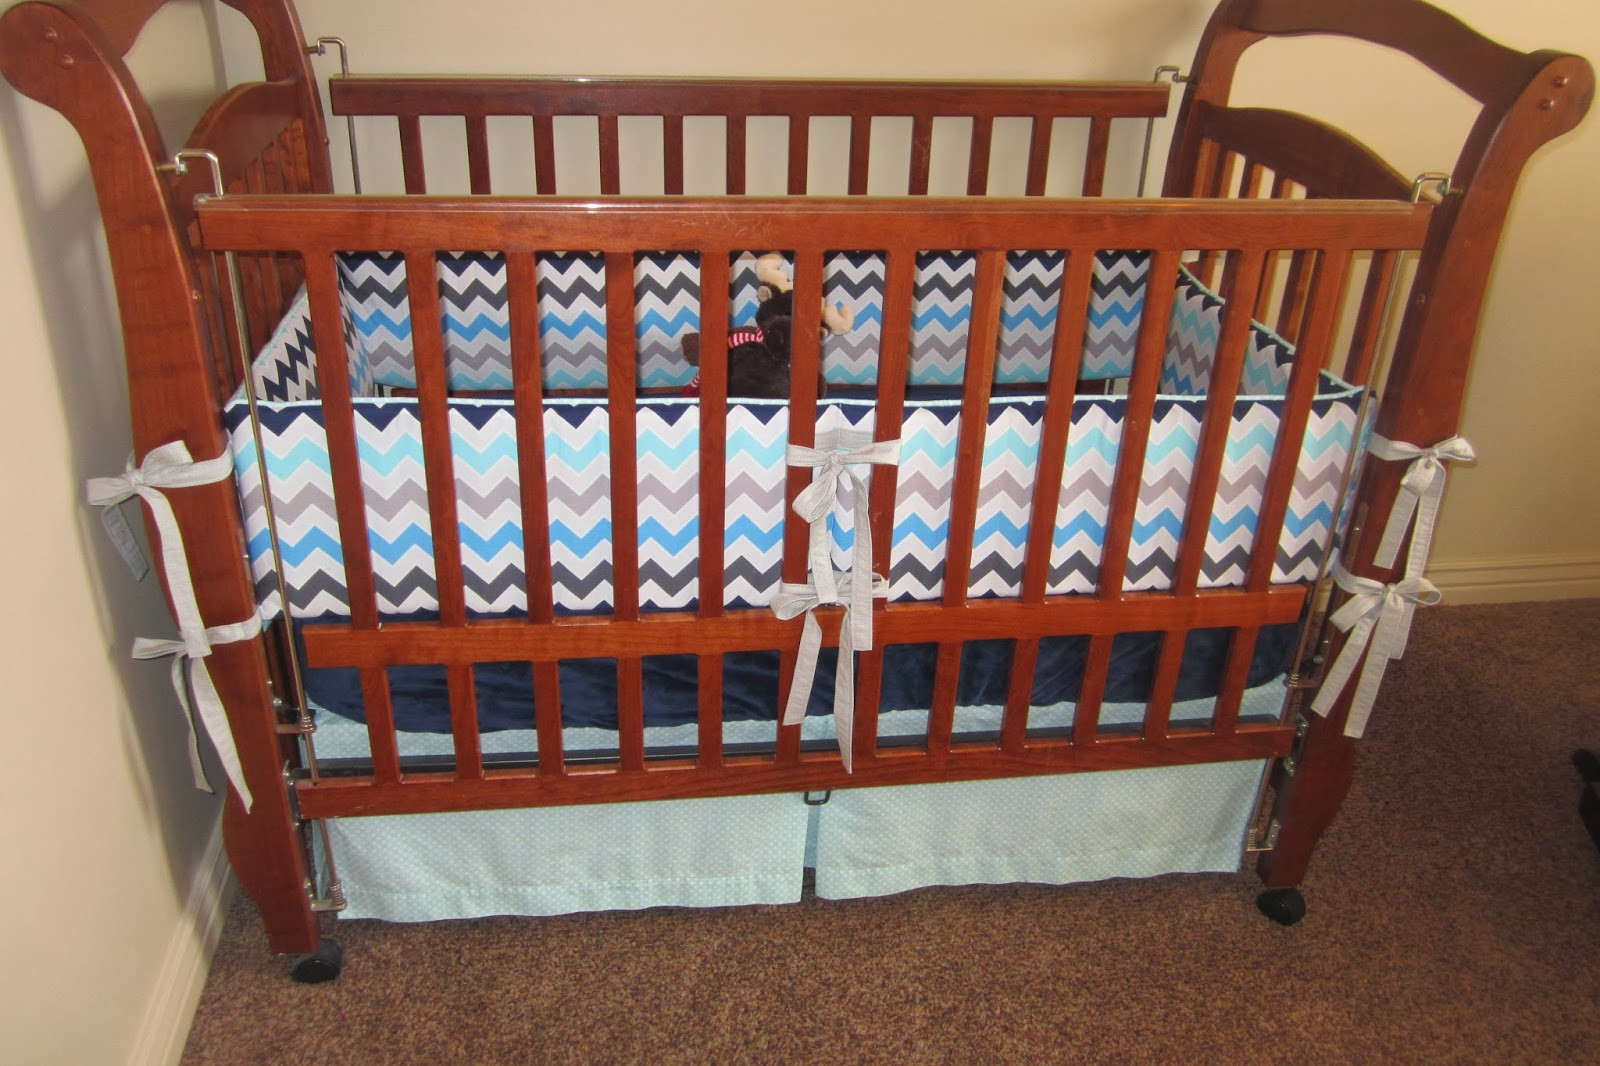 Best ideas about Used Baby Furniture . Save or Pin Types Used Baby Furniture TheyDesign TheyDesign Now.